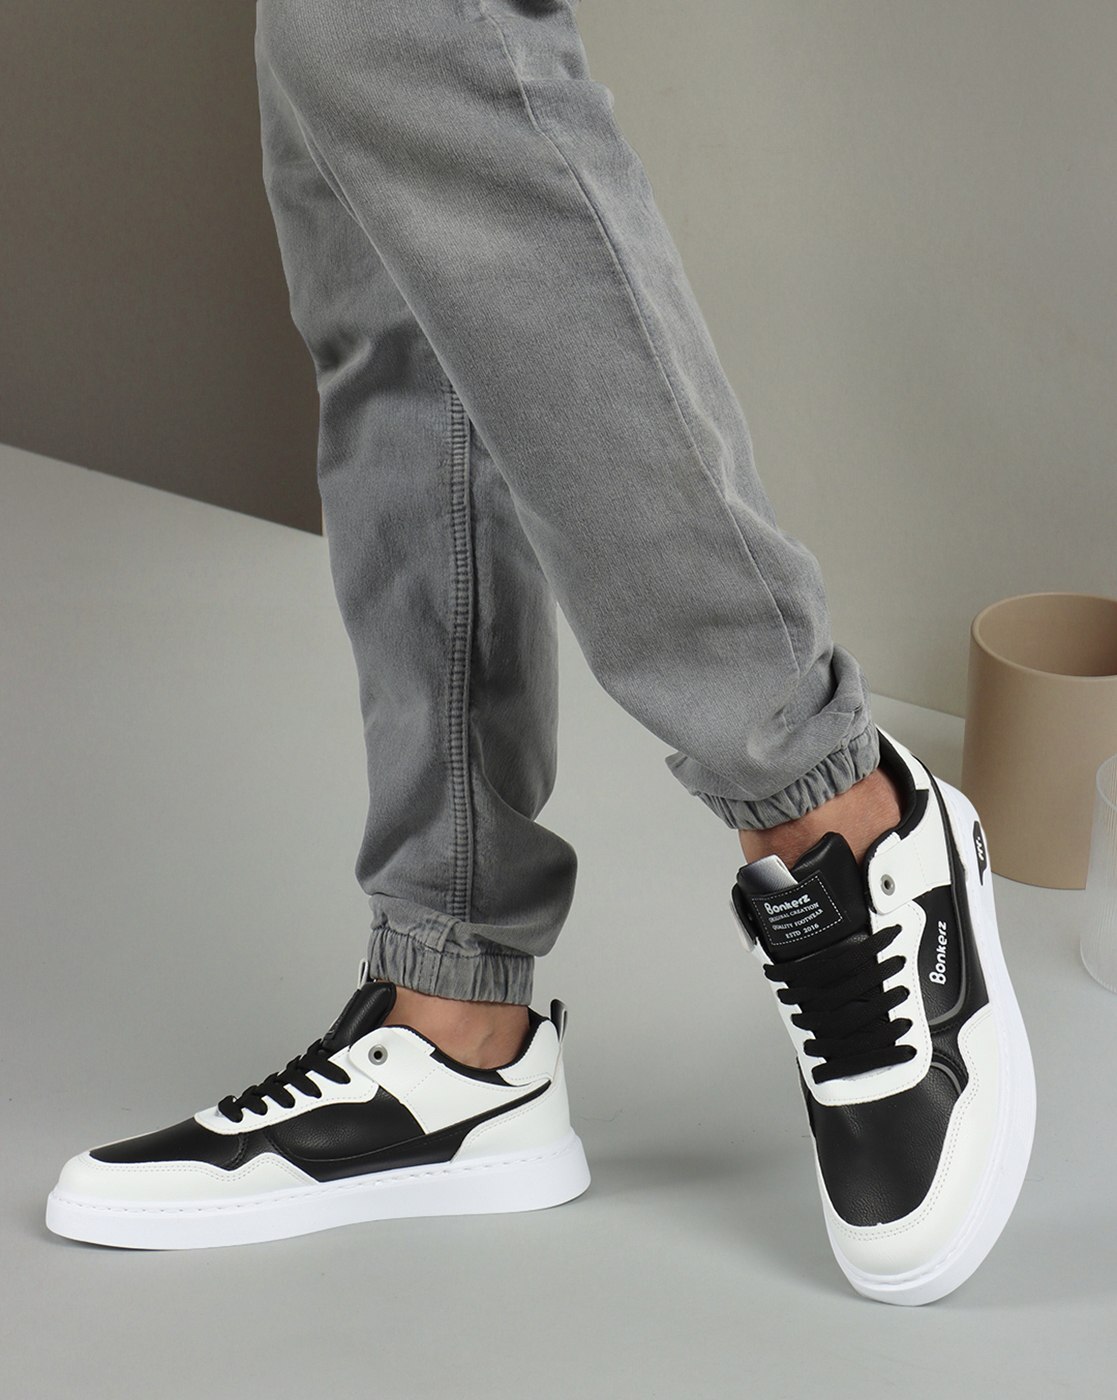 Reveal 166+ black and white sneakers super hot